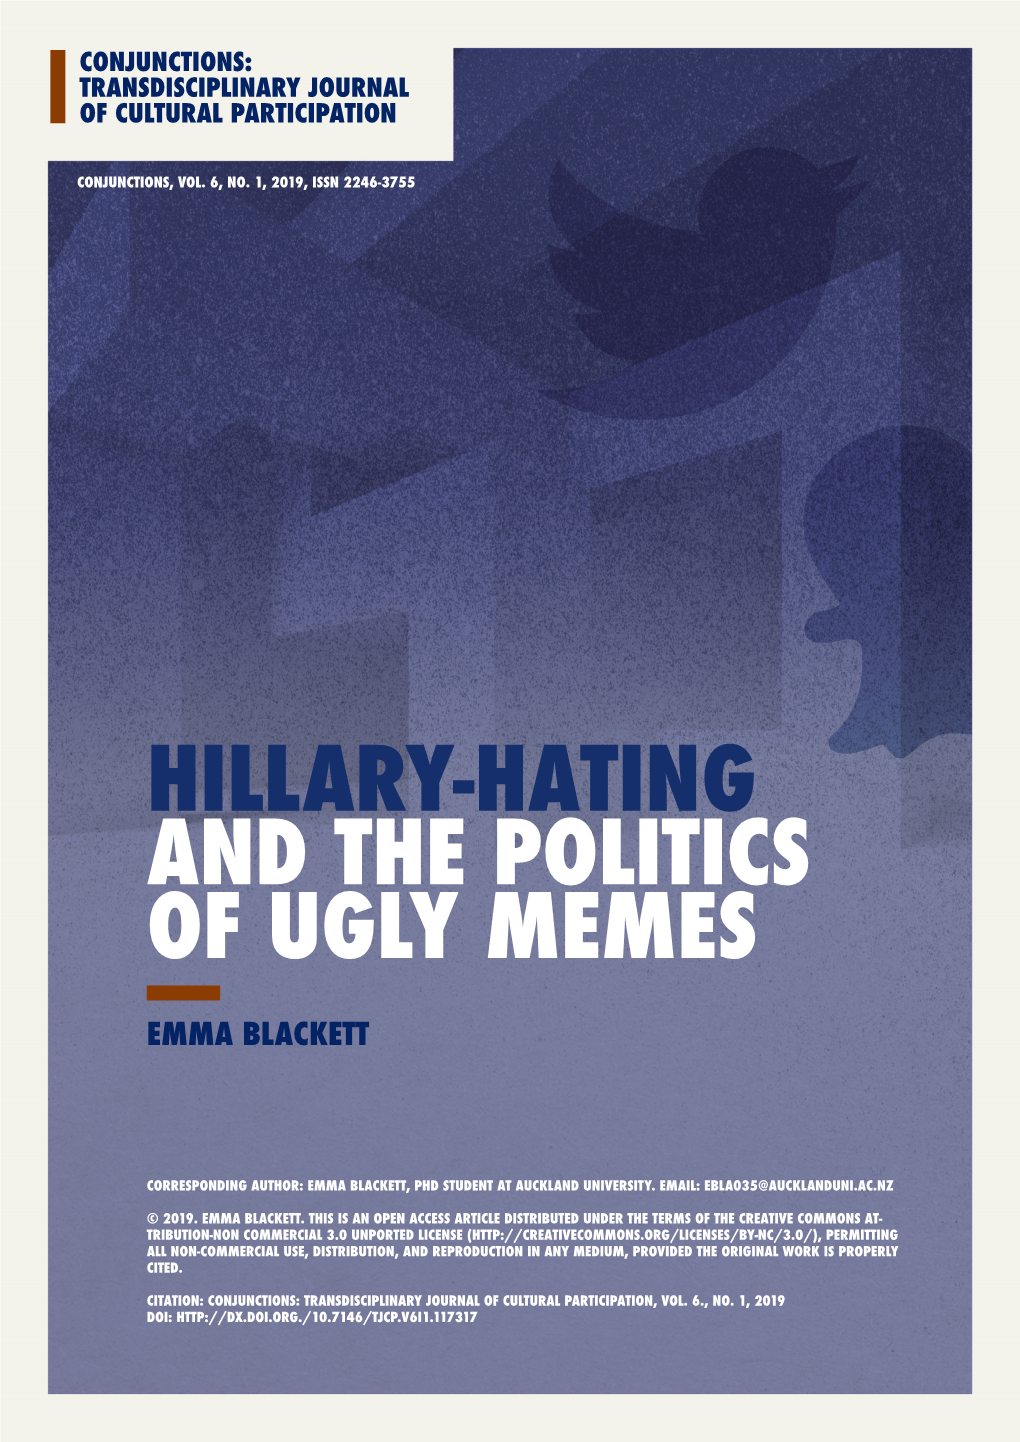 Hillary-Hating and the Politics of Ugly Memes